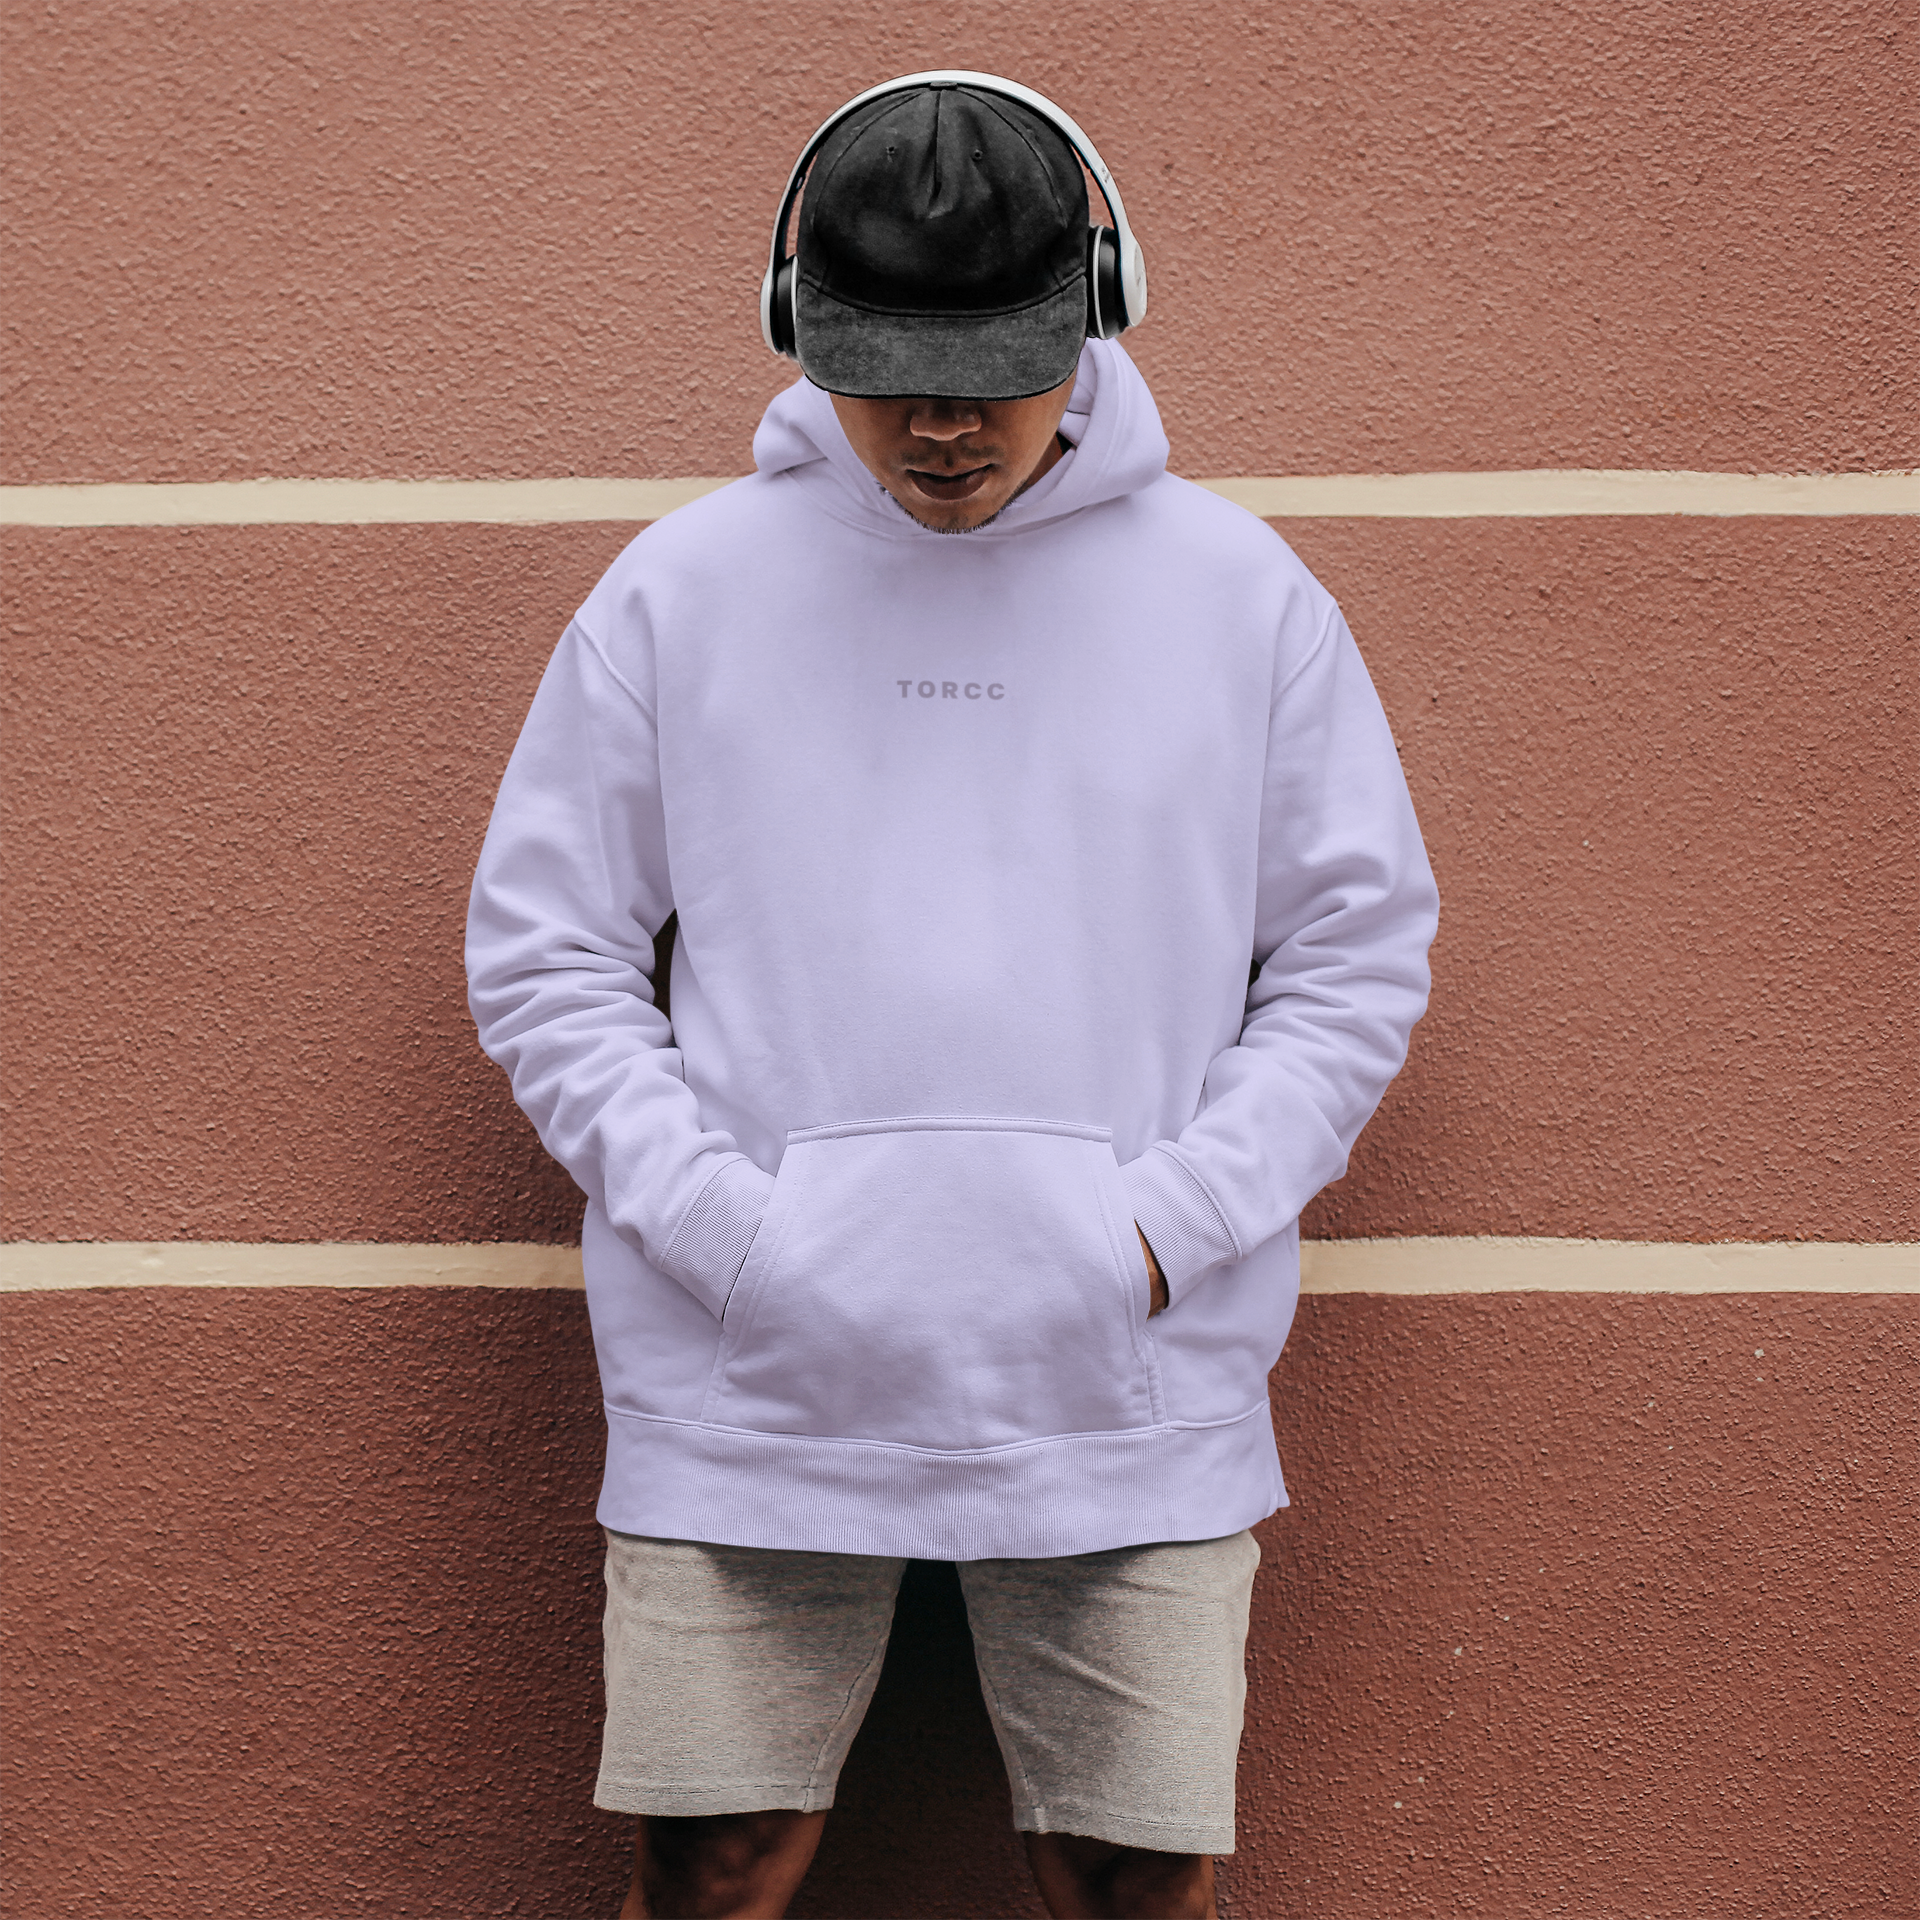 Lavender Blank Hoodie for Men and Womenoversized tshirt for men, oversized tshirt for women, graphic oversized tshirt, streetwear oversized tshirt, oversized tshirt, oversized tee, hoodie for men, hoodie for women, hoodie men, hoodies on sale